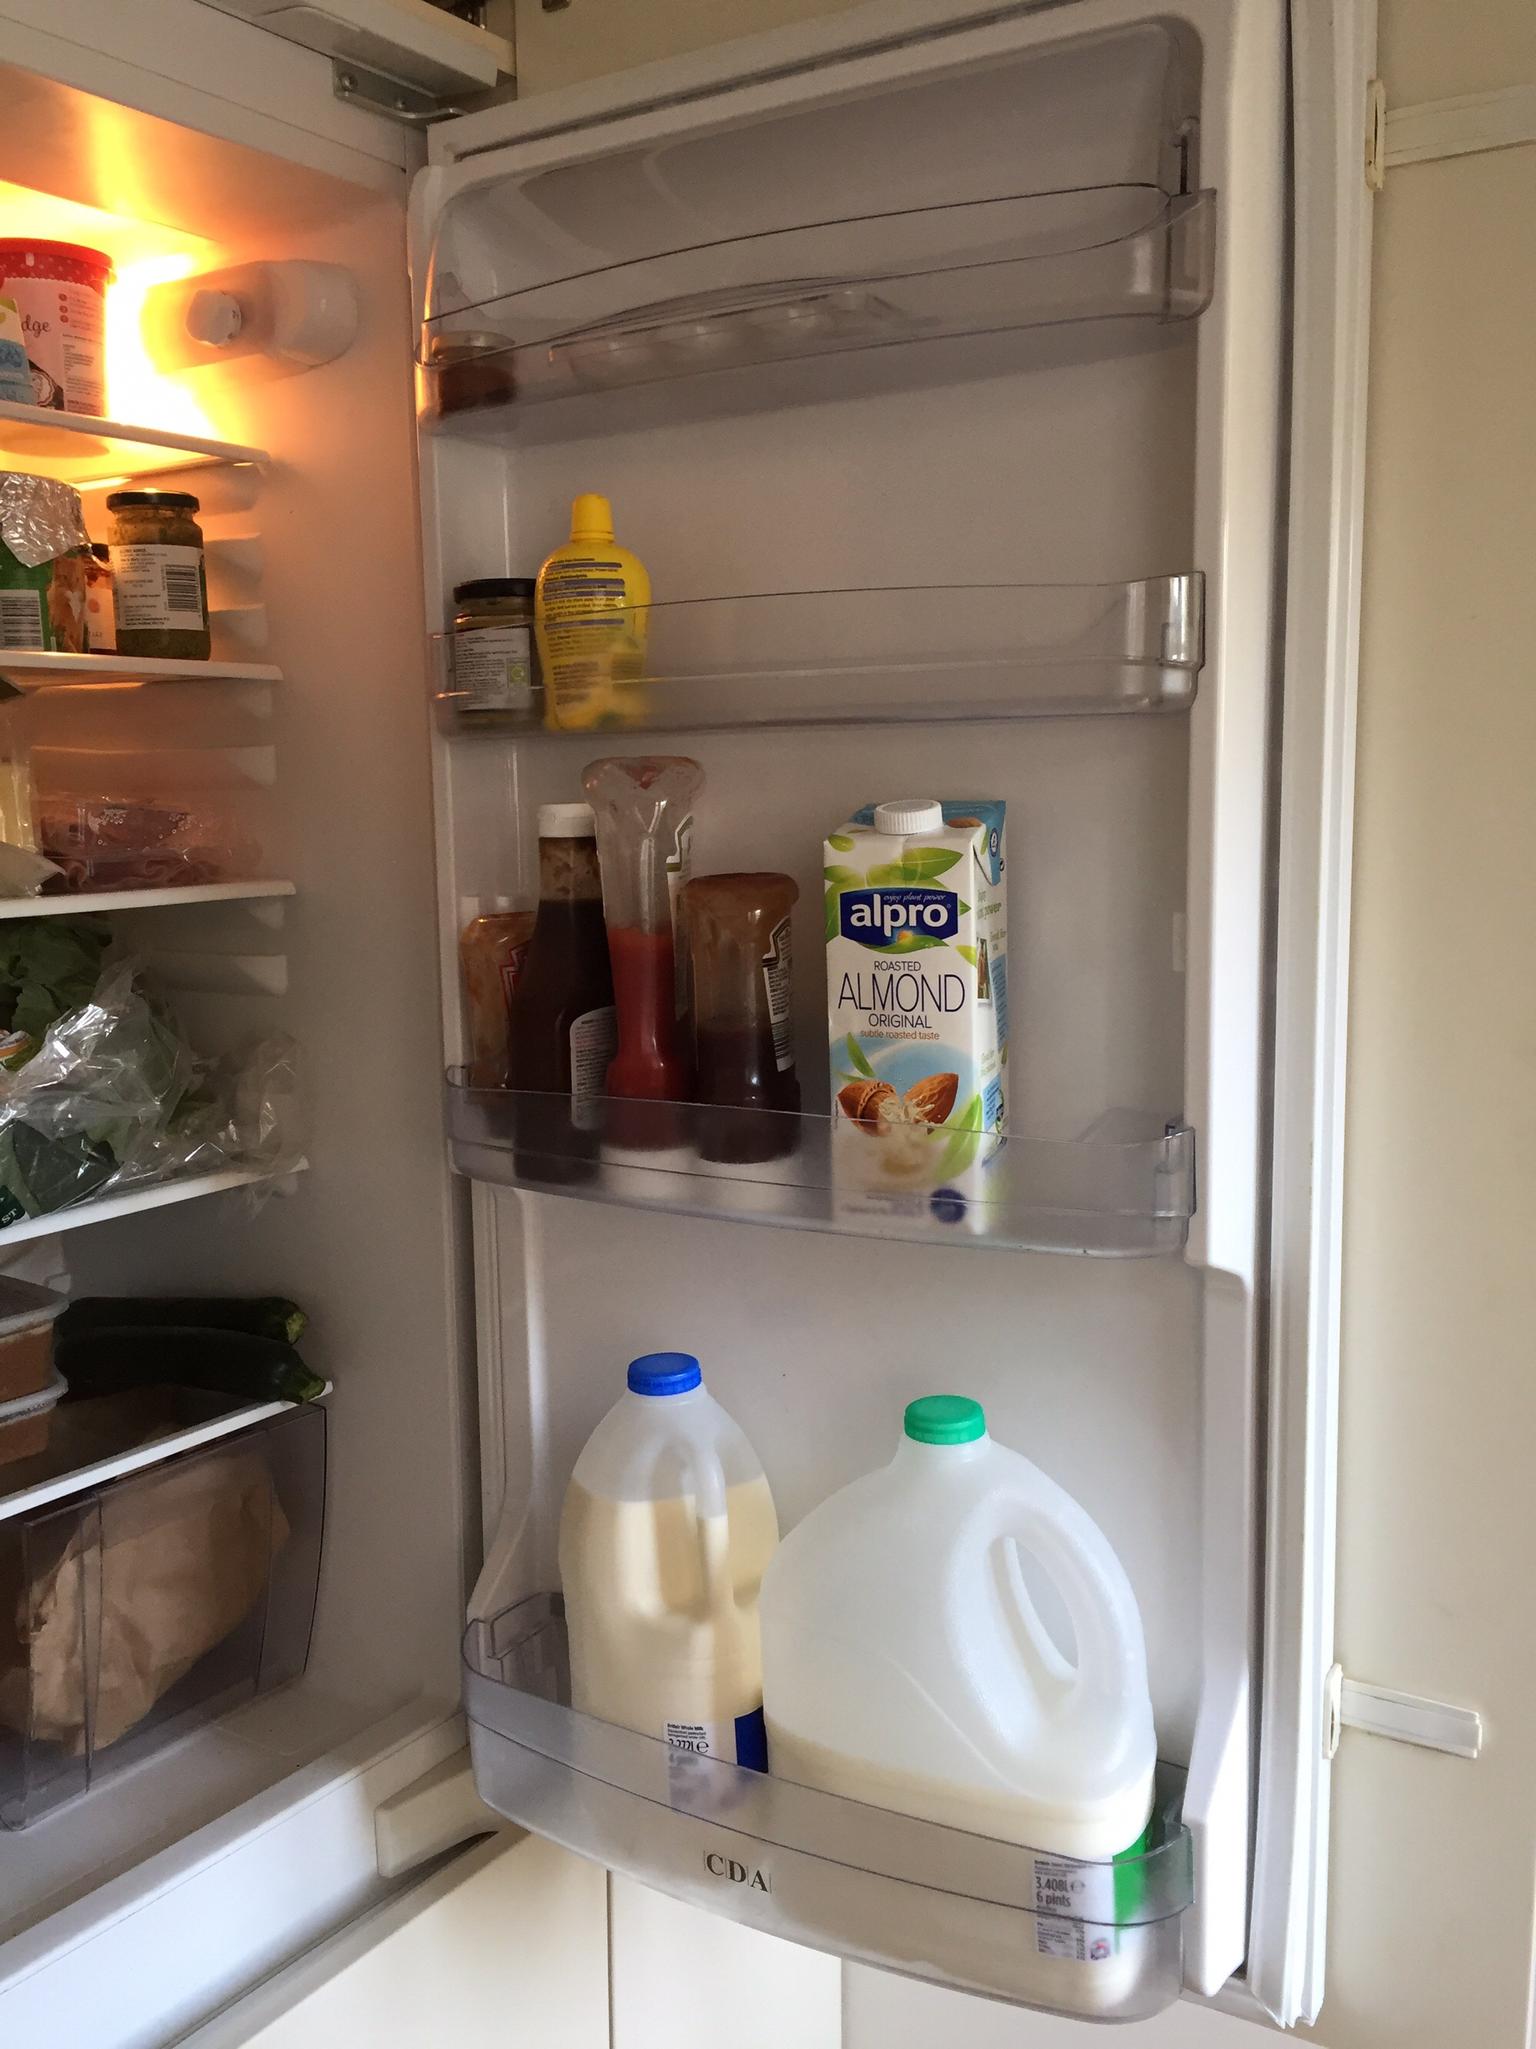 Cda 70 30 Integrated Fridge Freezer In Cv6 Coventry For 5 00 For